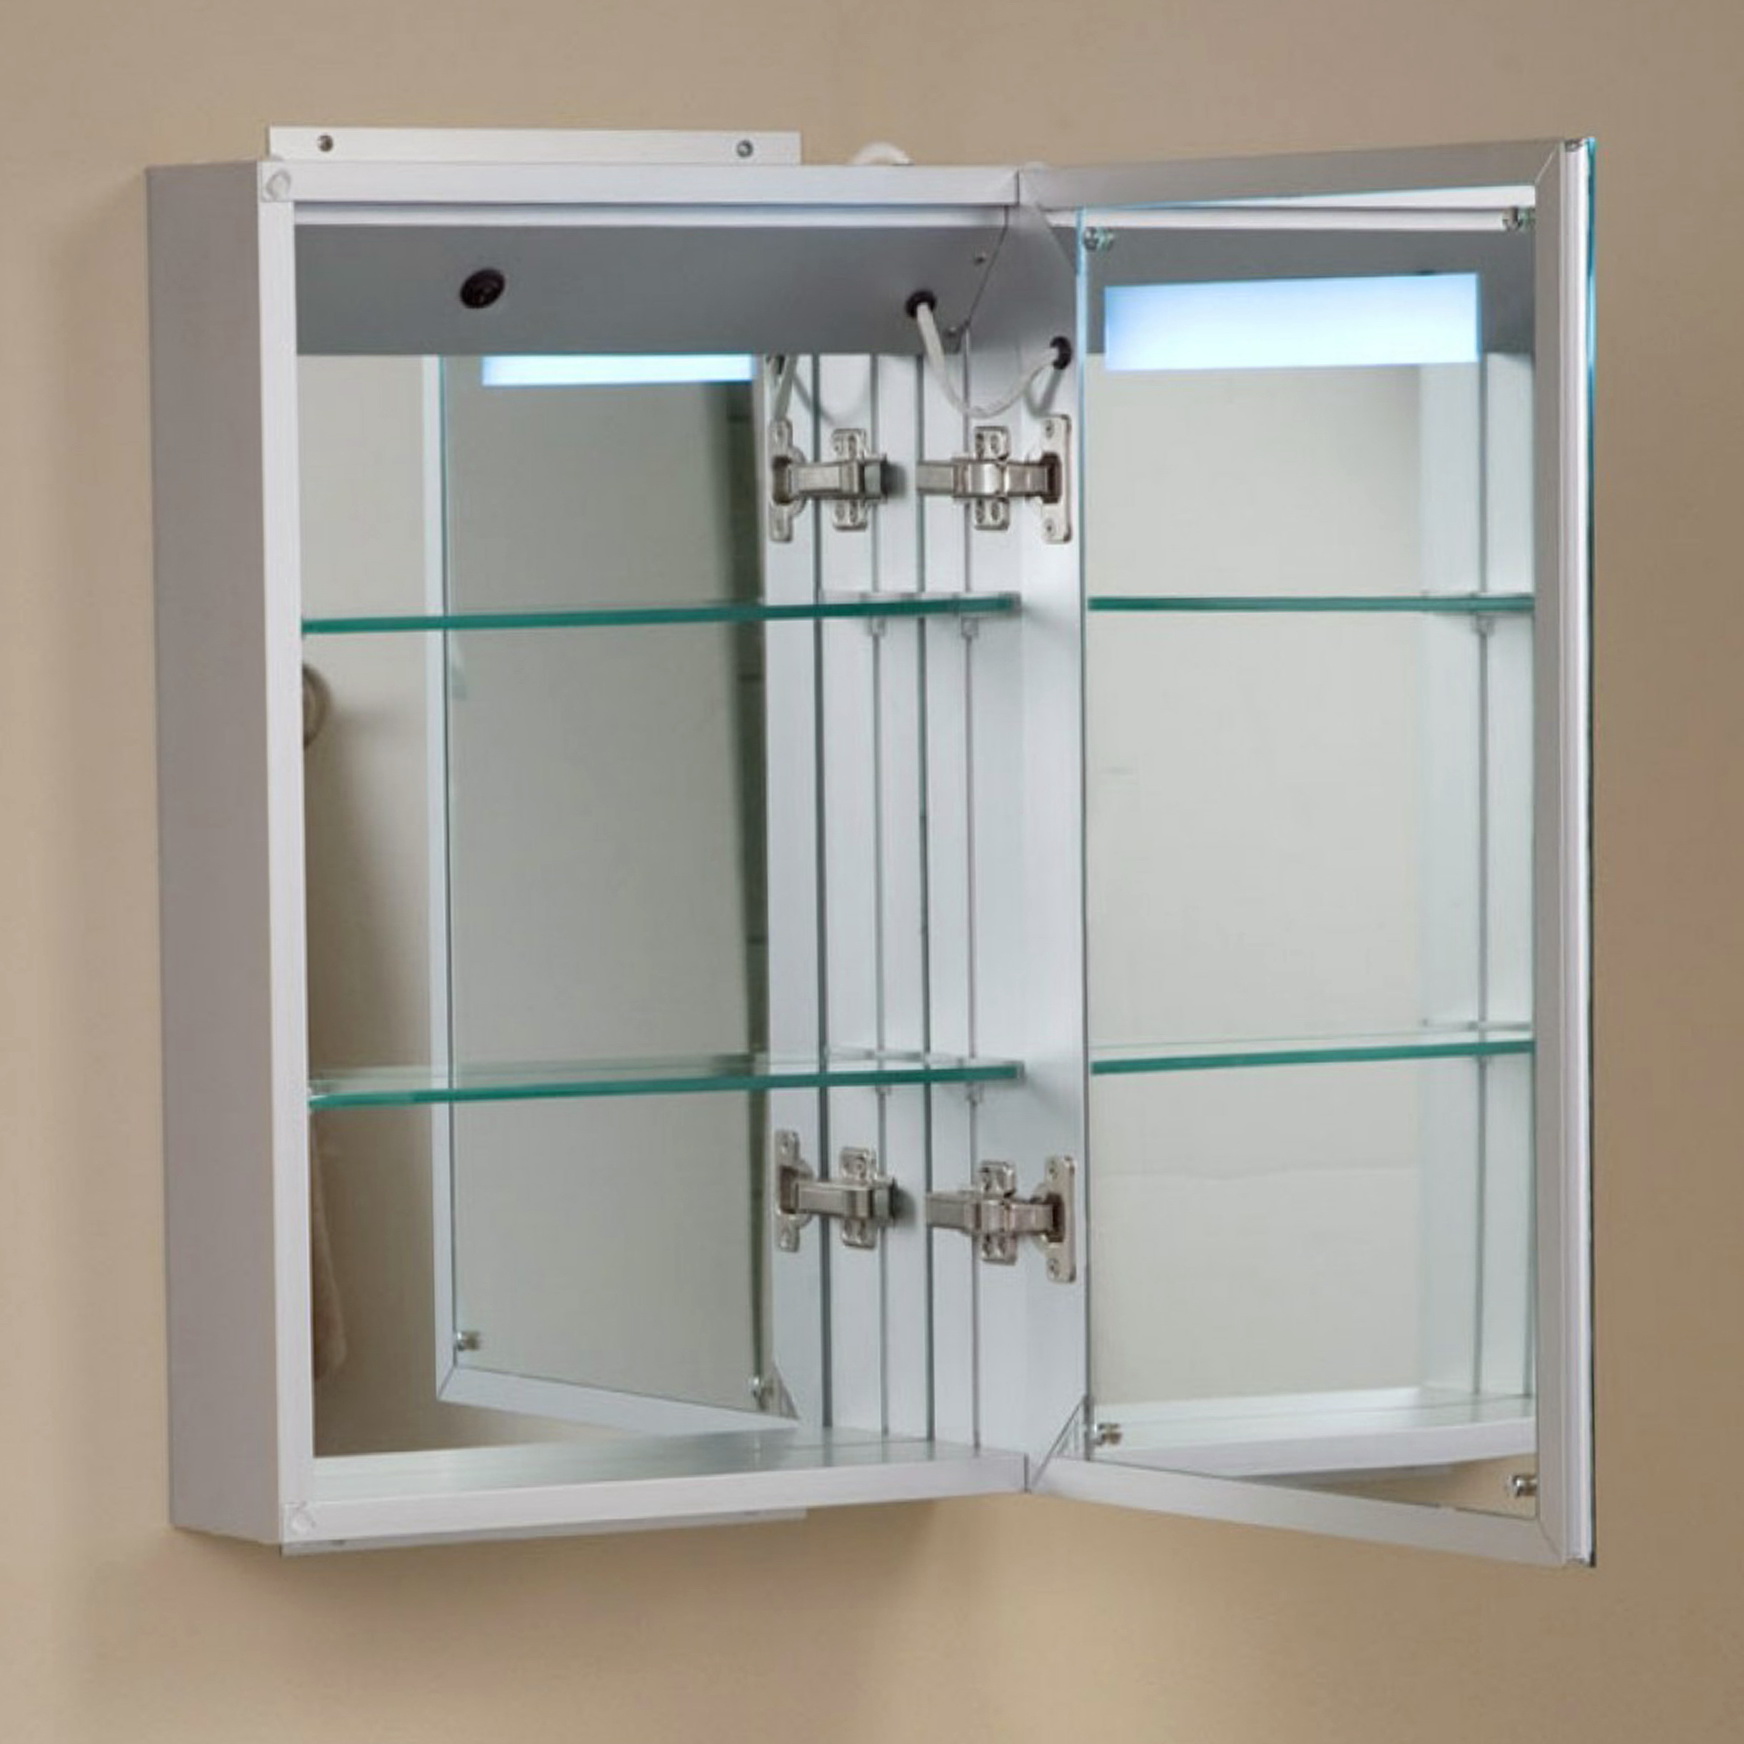 Bathroom Mirrors - Windsor Decorative Mirror with Shelf by Empire Industries | KitchenSource.com